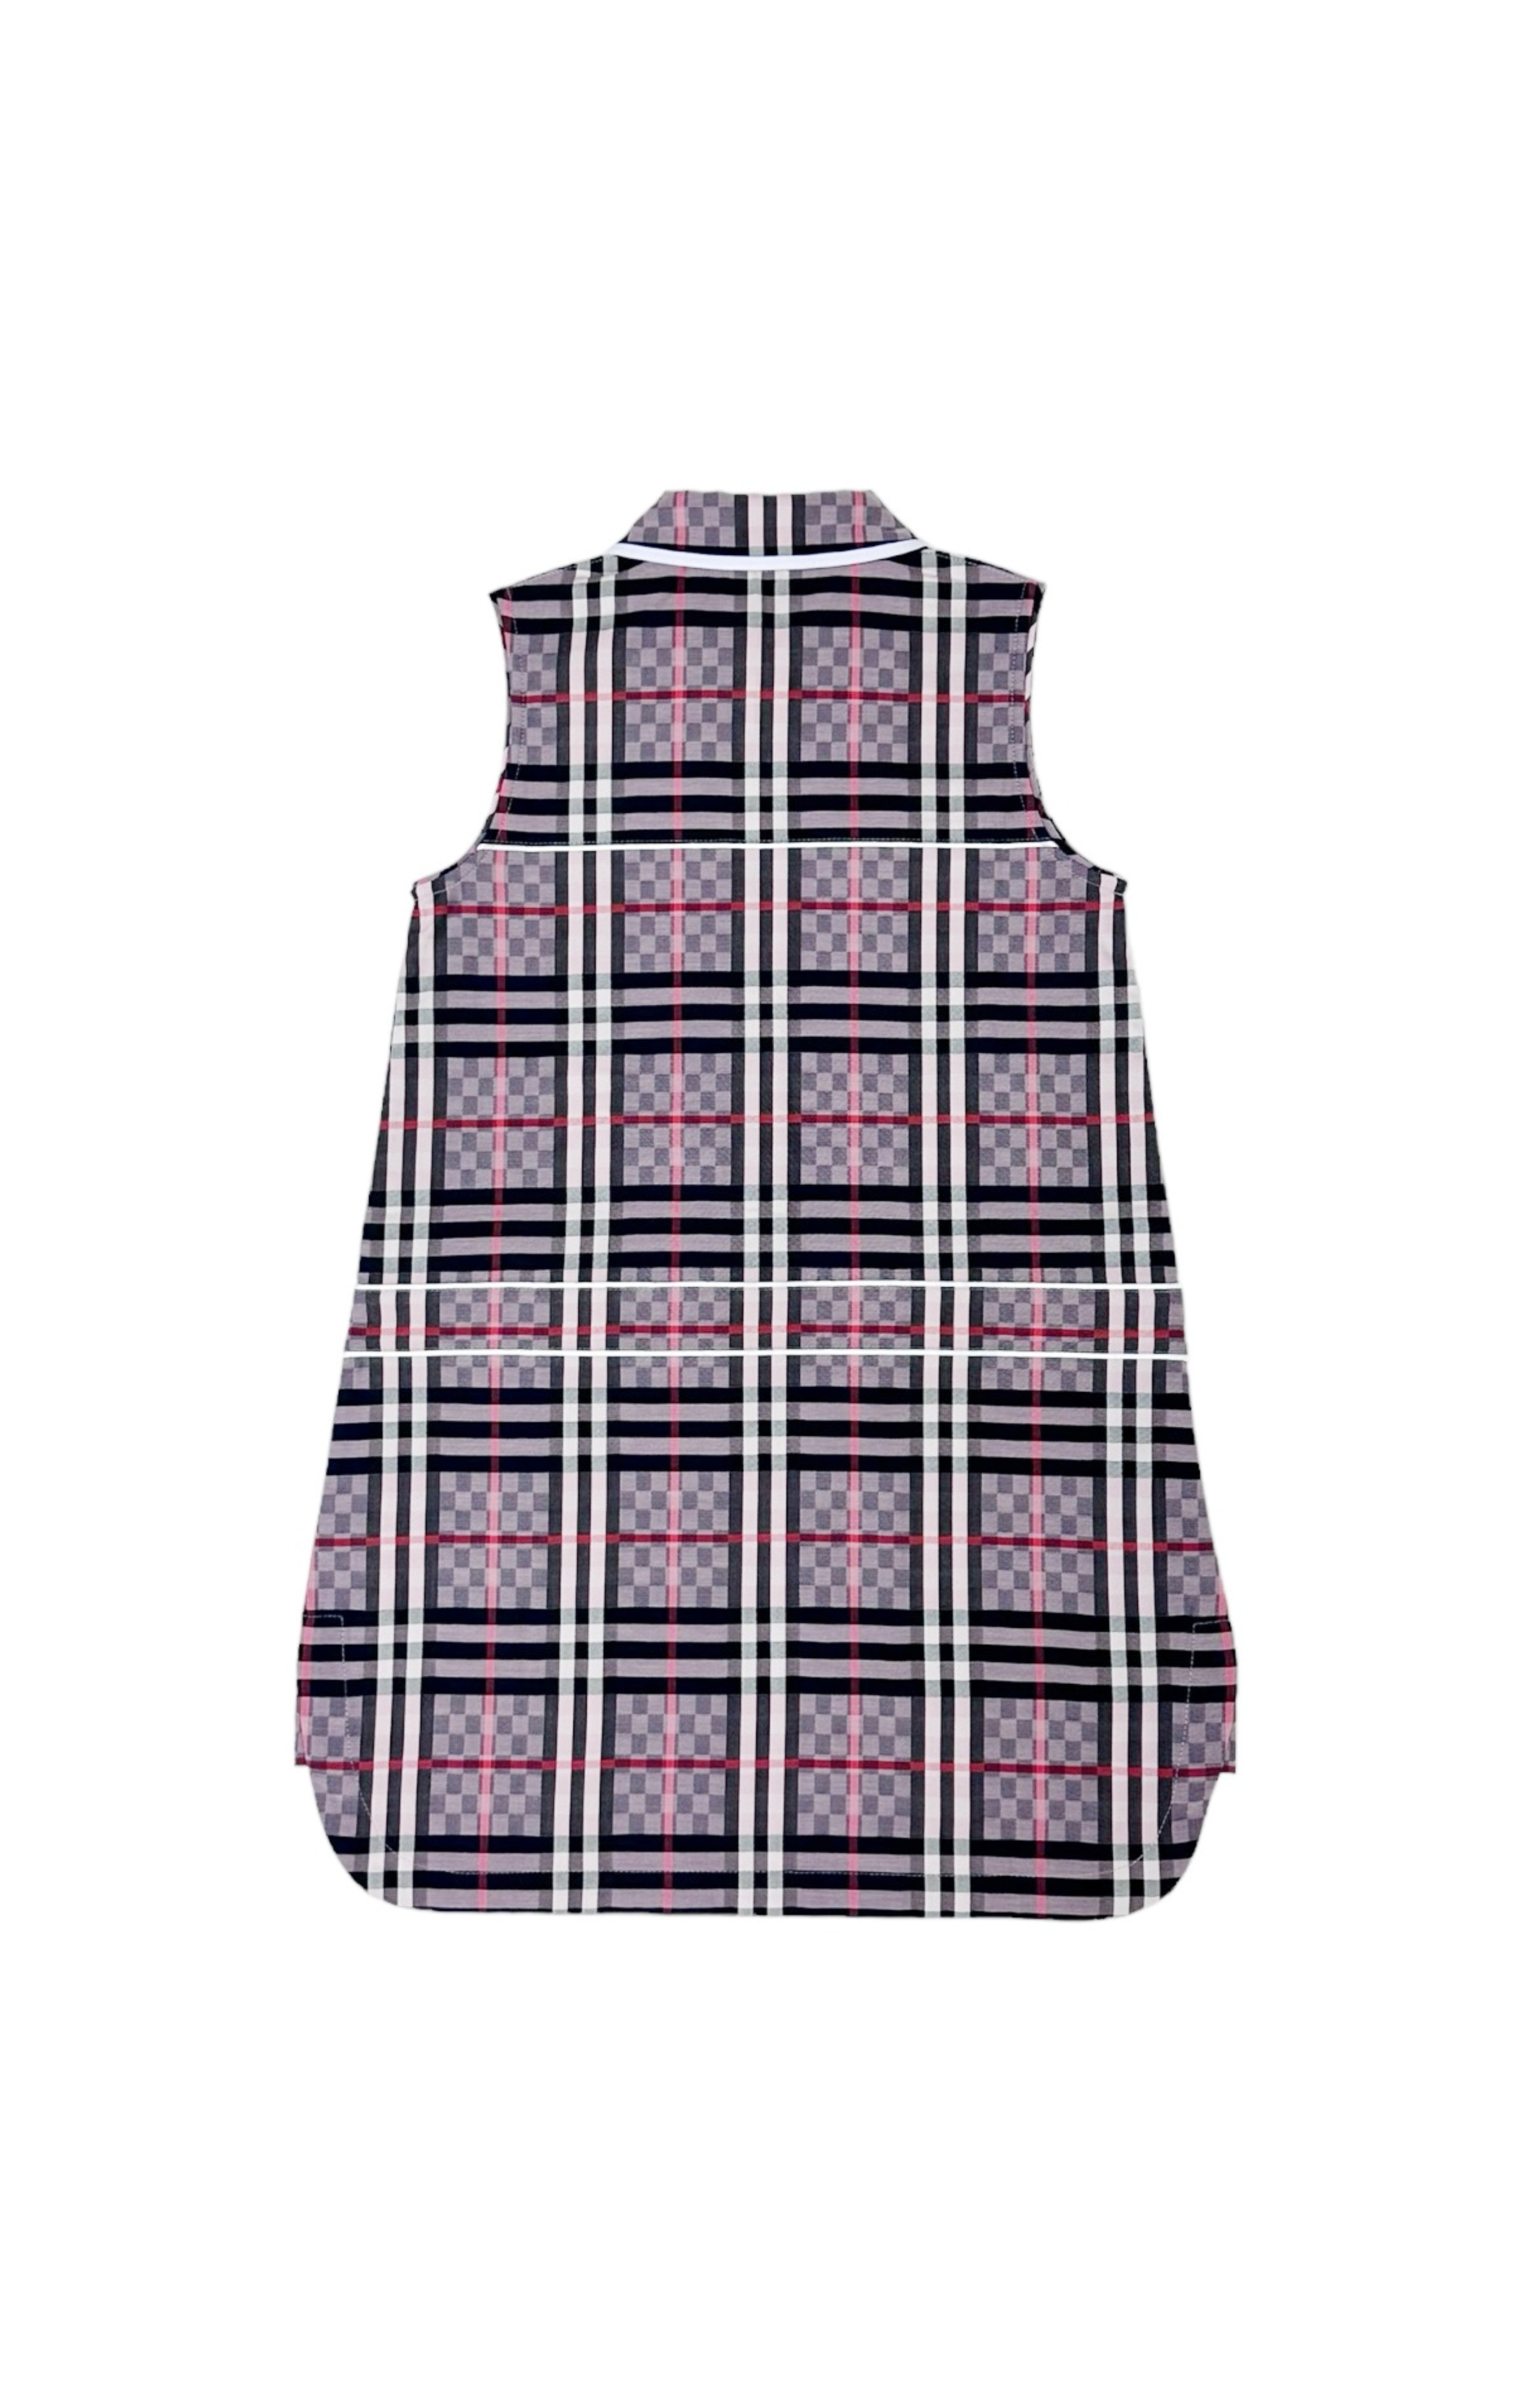 BURBERRY (NEW) with tags Dress Size: 6 Years